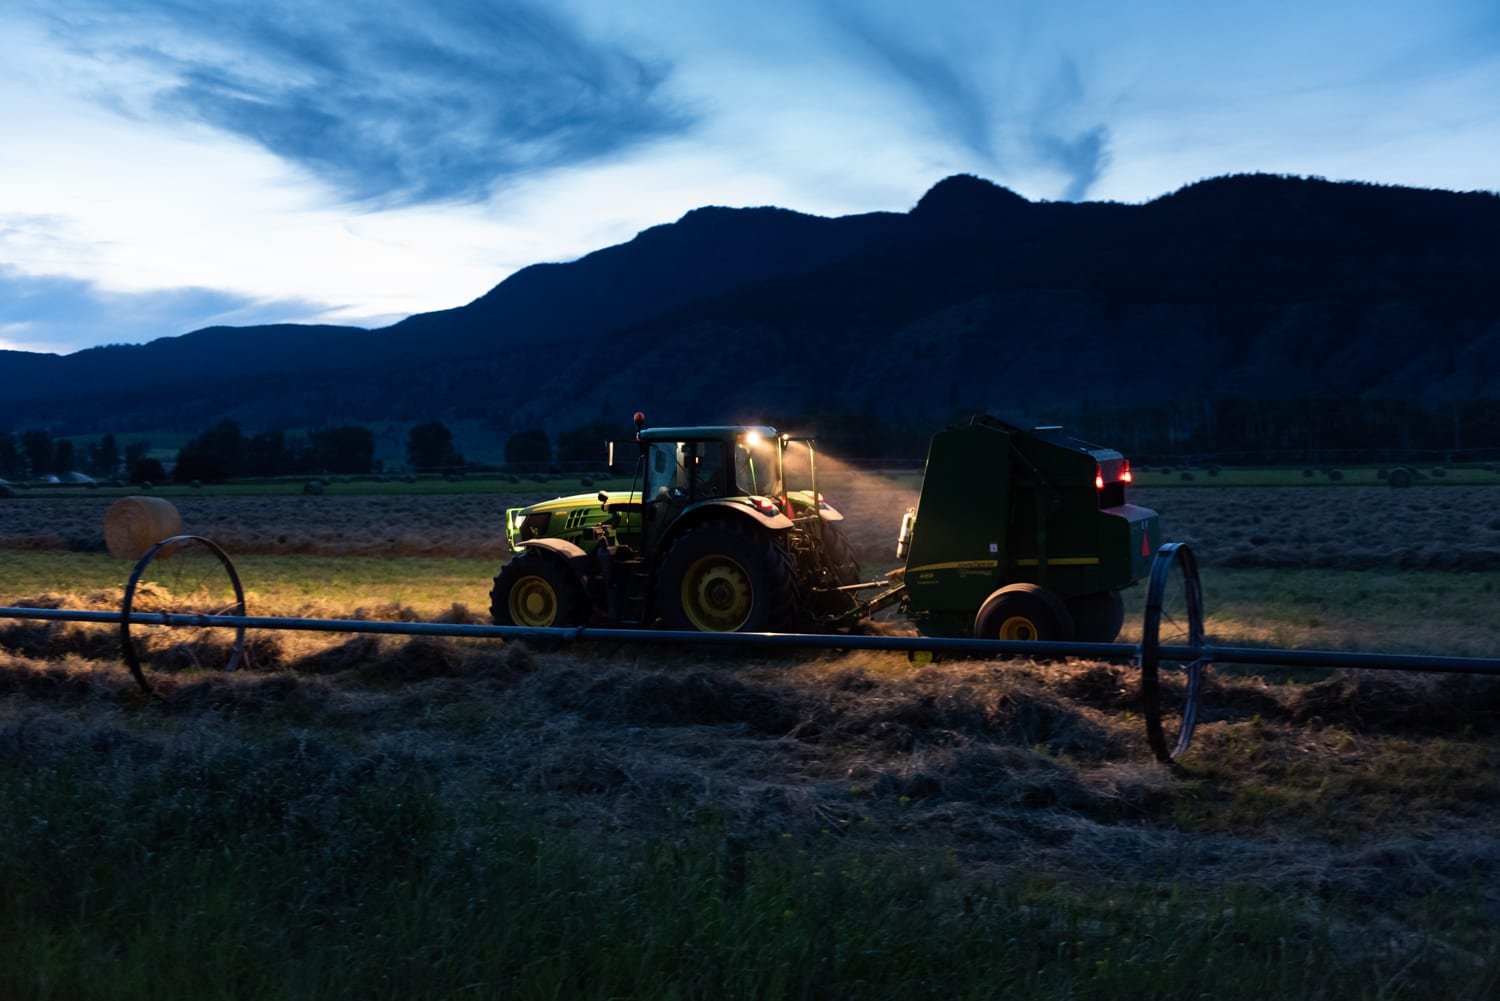 Kamloops rural life tractor with lights in field with blue sky and clouds